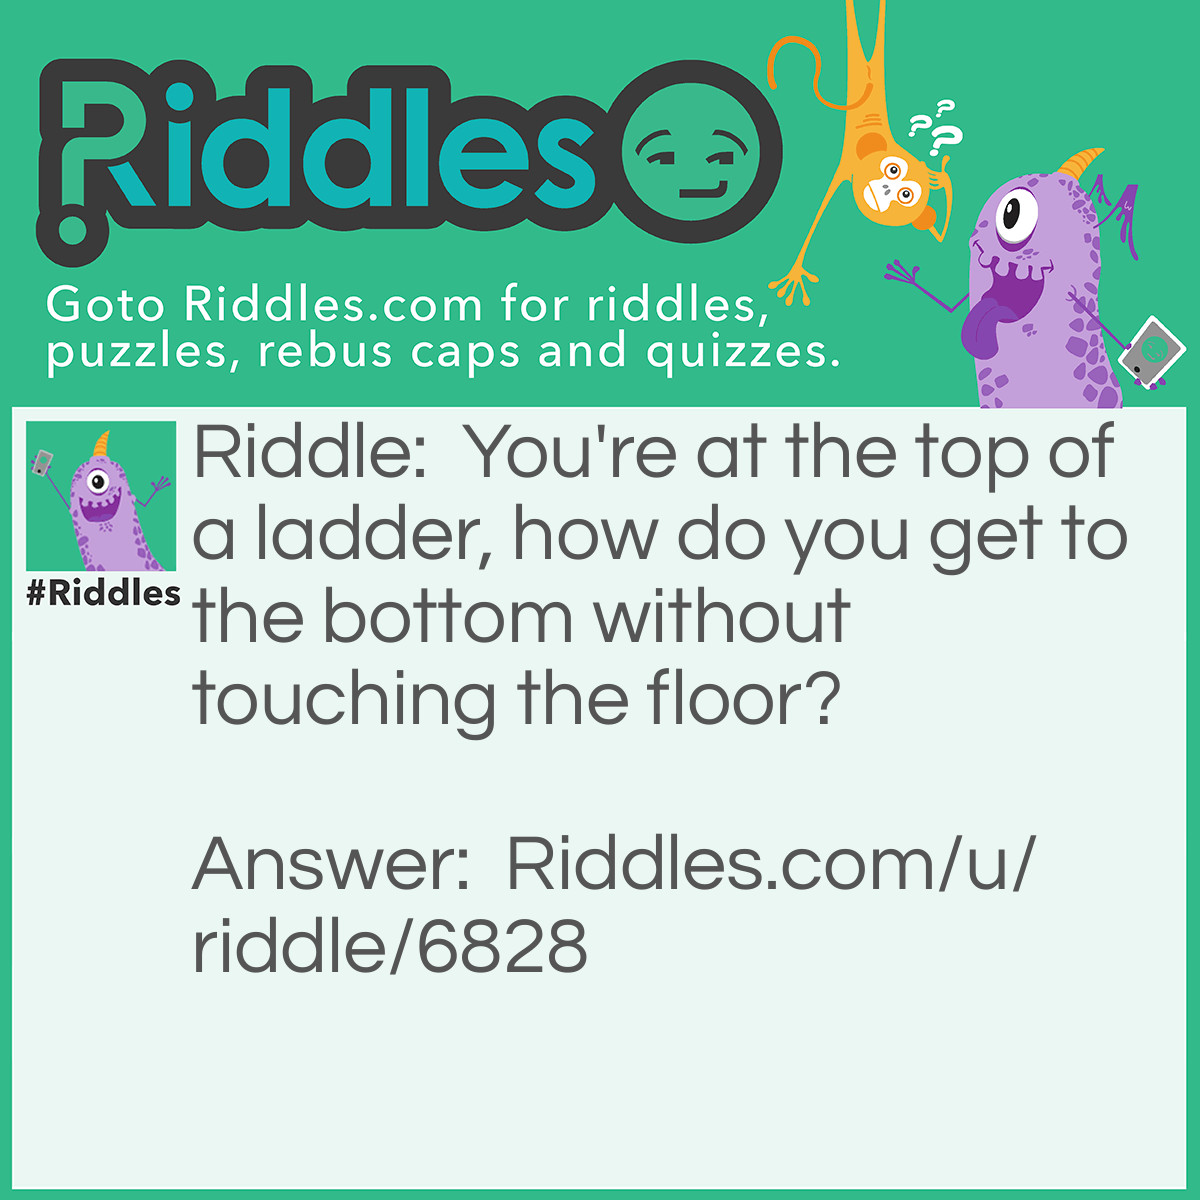 Riddle: You're at the top of a ladder, how do you get to the bottom without touching the floor? Answer: Keep going down the ladder until you are at the first step - the bottom.